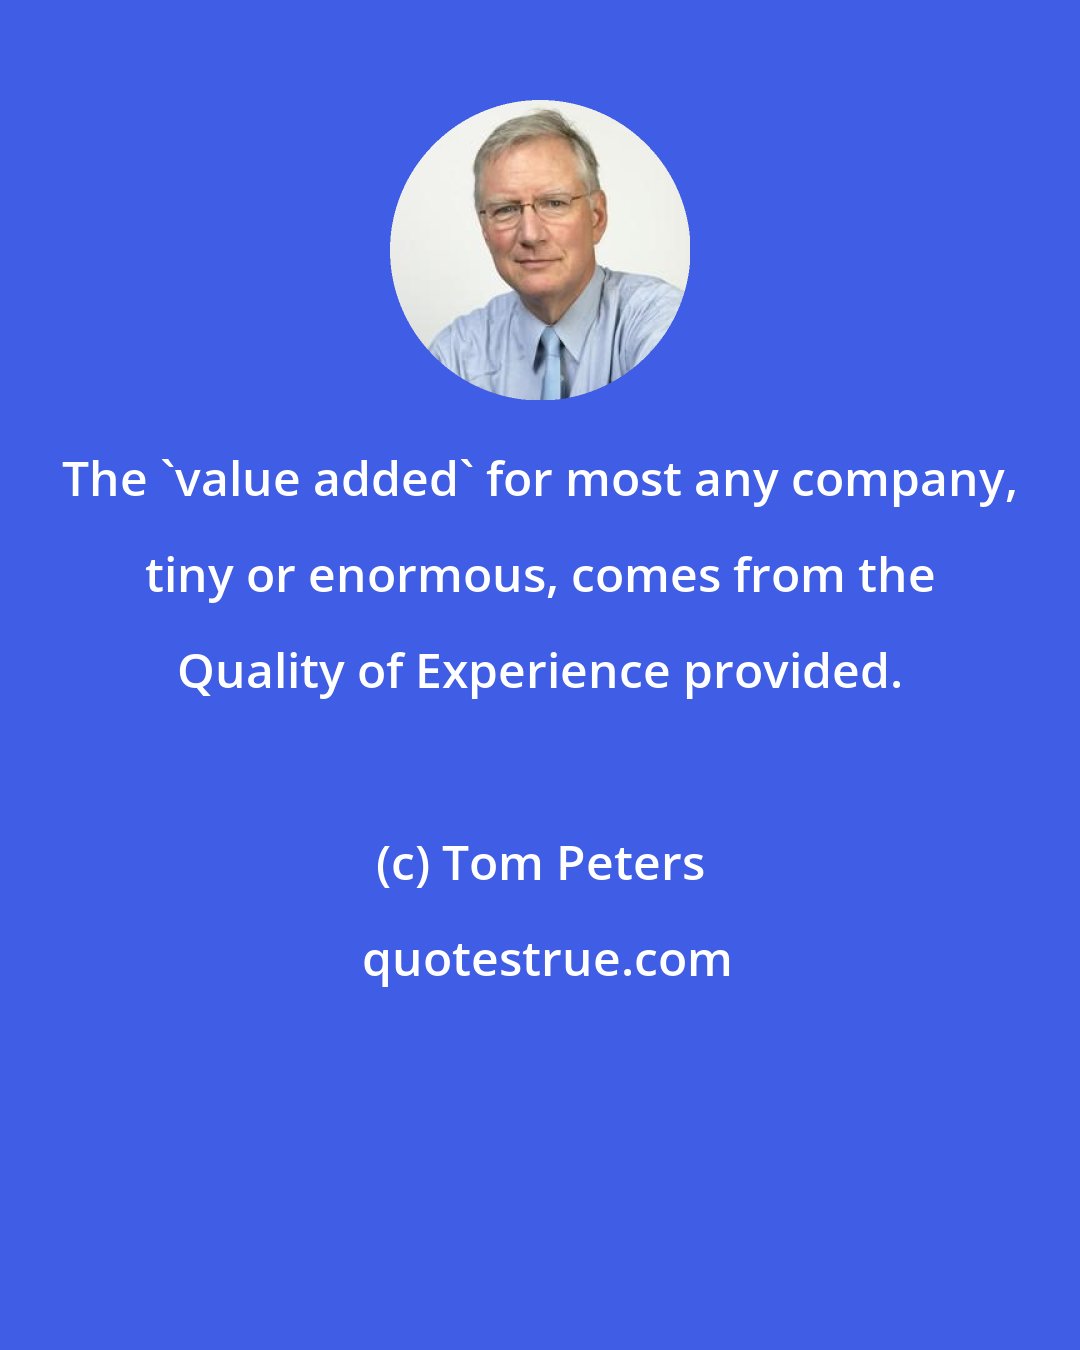 Tom Peters: The 'value added' for most any company, tiny or enormous, comes from the Quality of Experience provided.